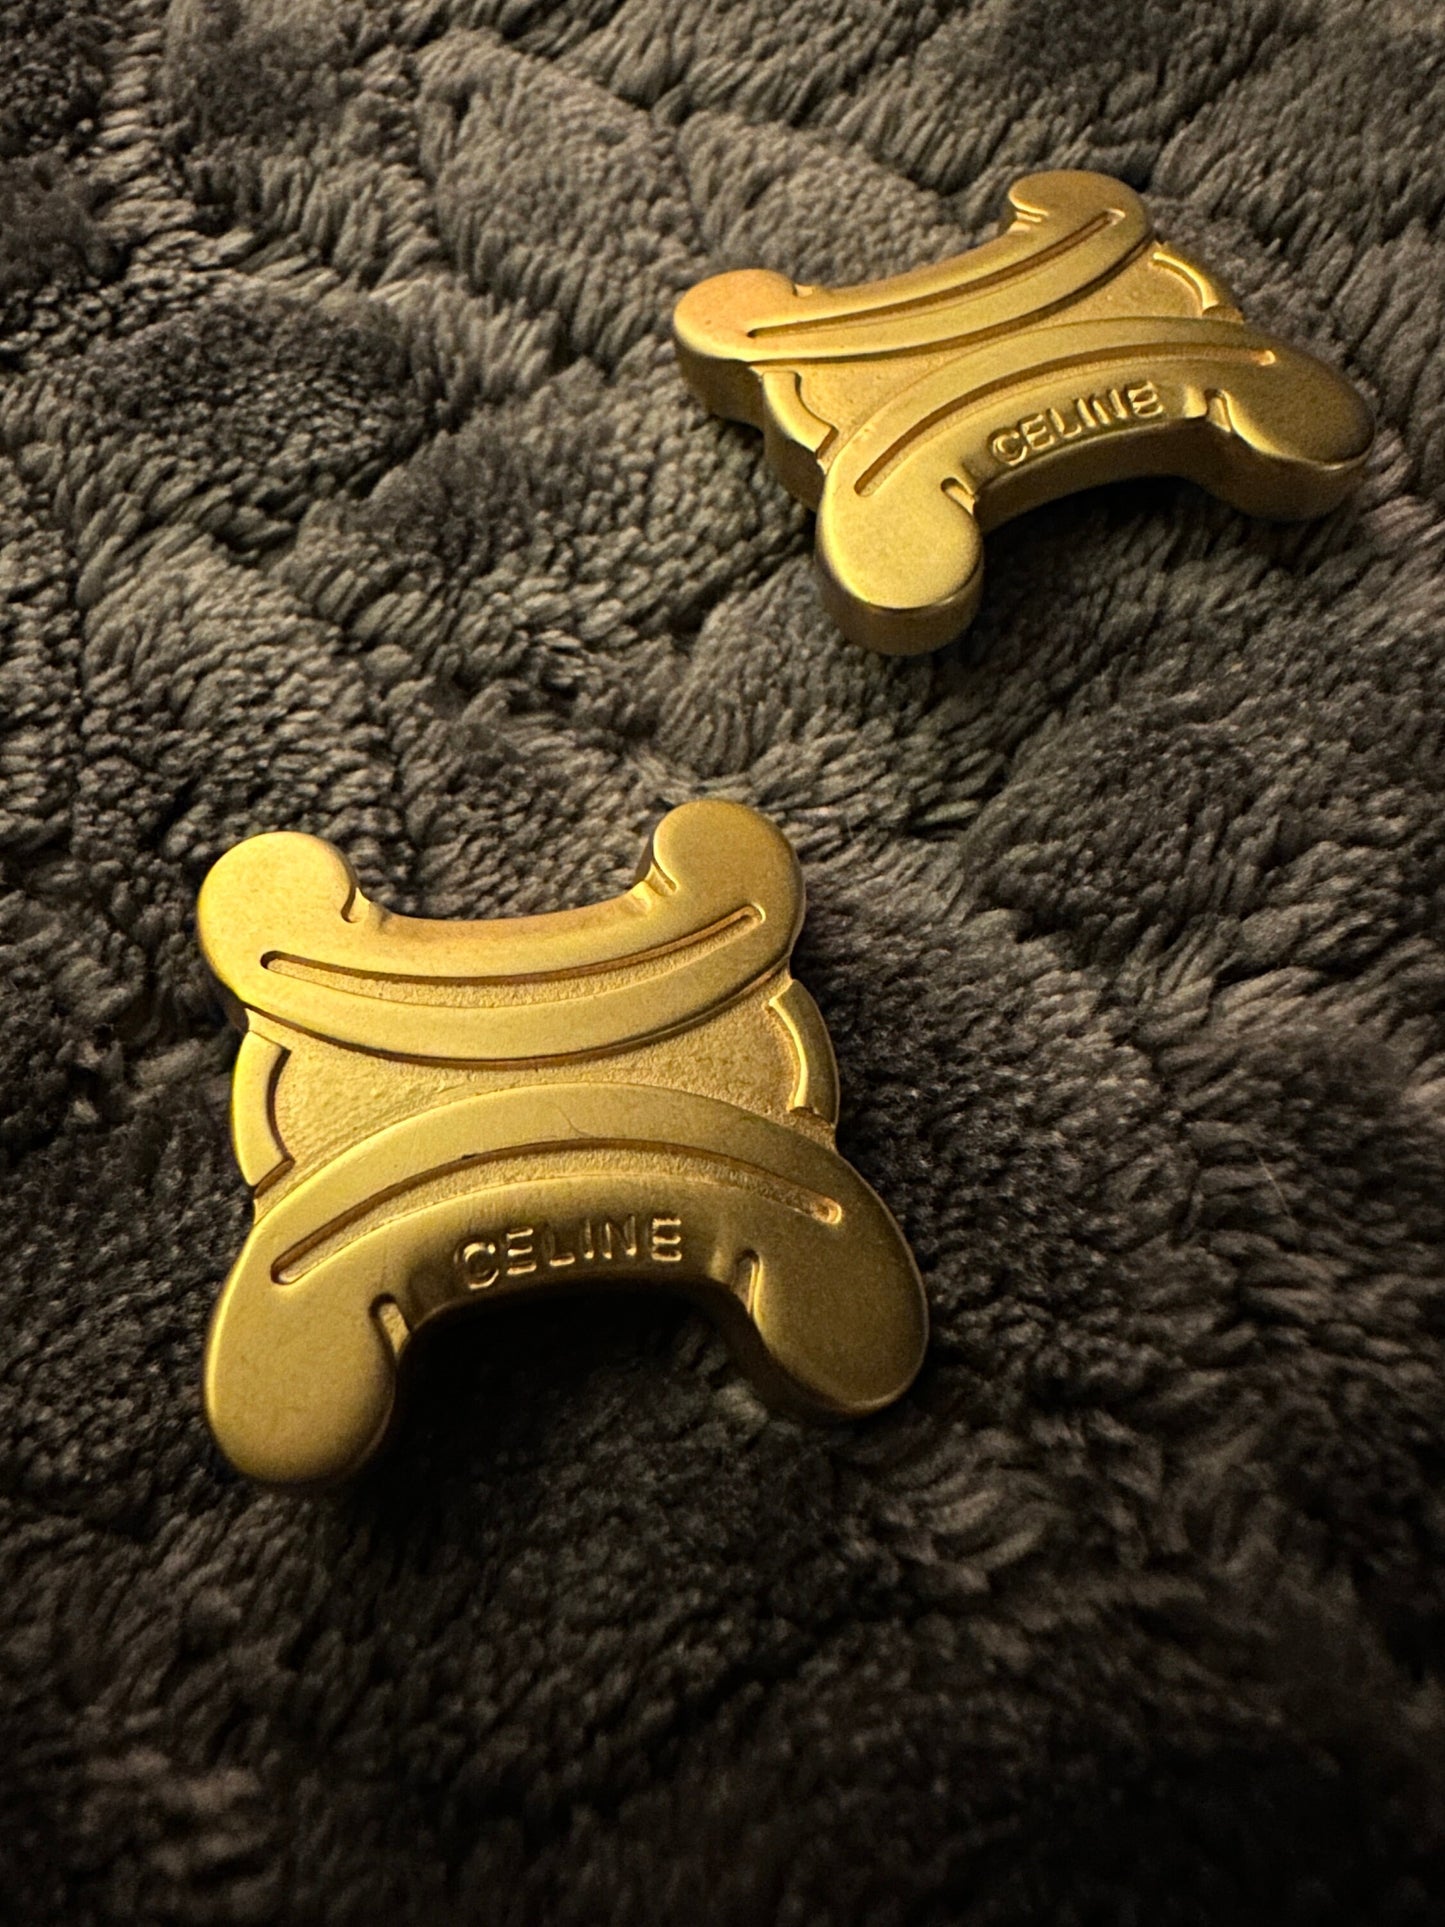 CELINE VINTAGE 100% Authentic Genuine Clip On Logo Earrings in Gold, 1990's, Great Condition